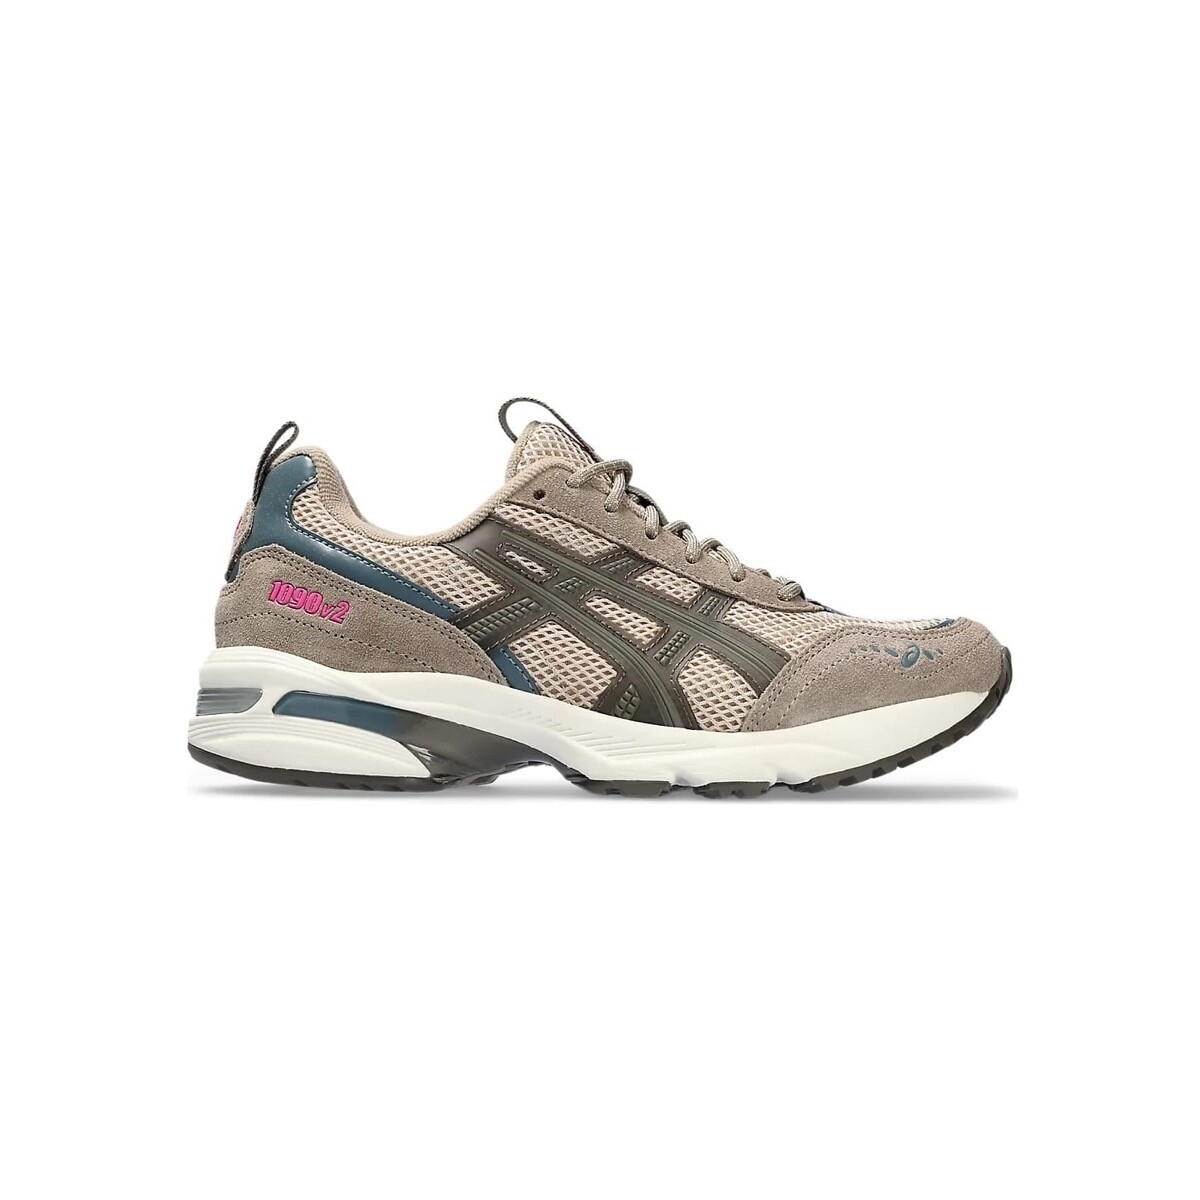 Schoenen Dames Sneakers Asics Gel-1090v2 - Simply Taupe/Dark Taupe Grijs